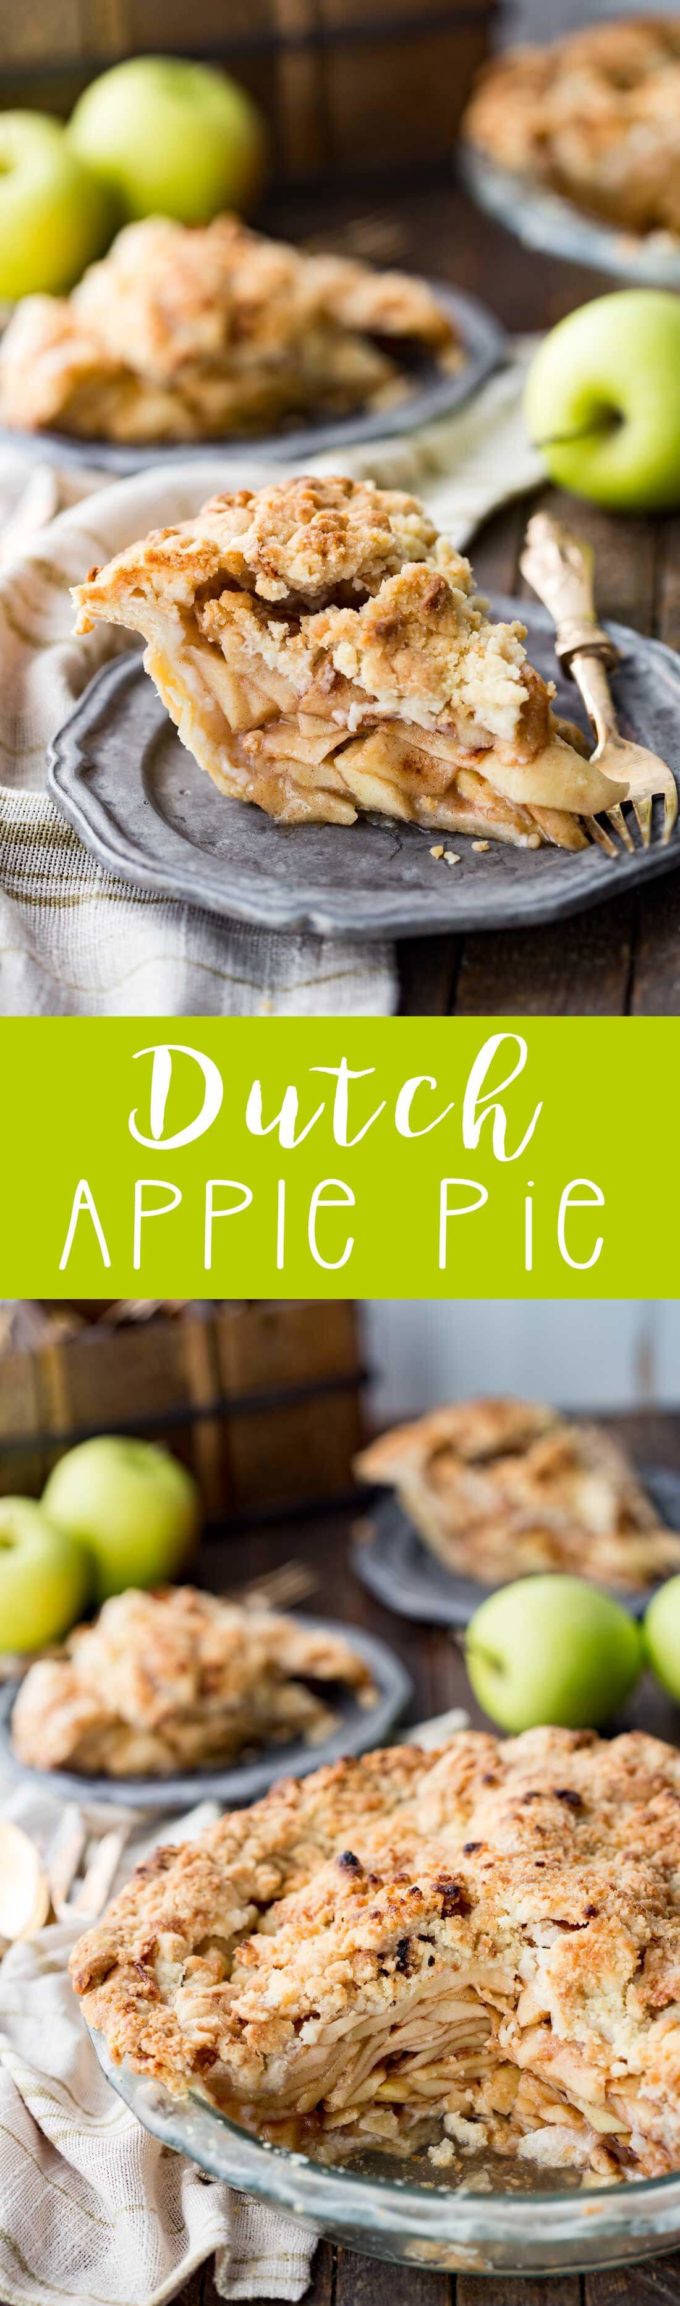 Dutch apple pie, thick apple slices, perfectly spiced, and a crumble topping. 